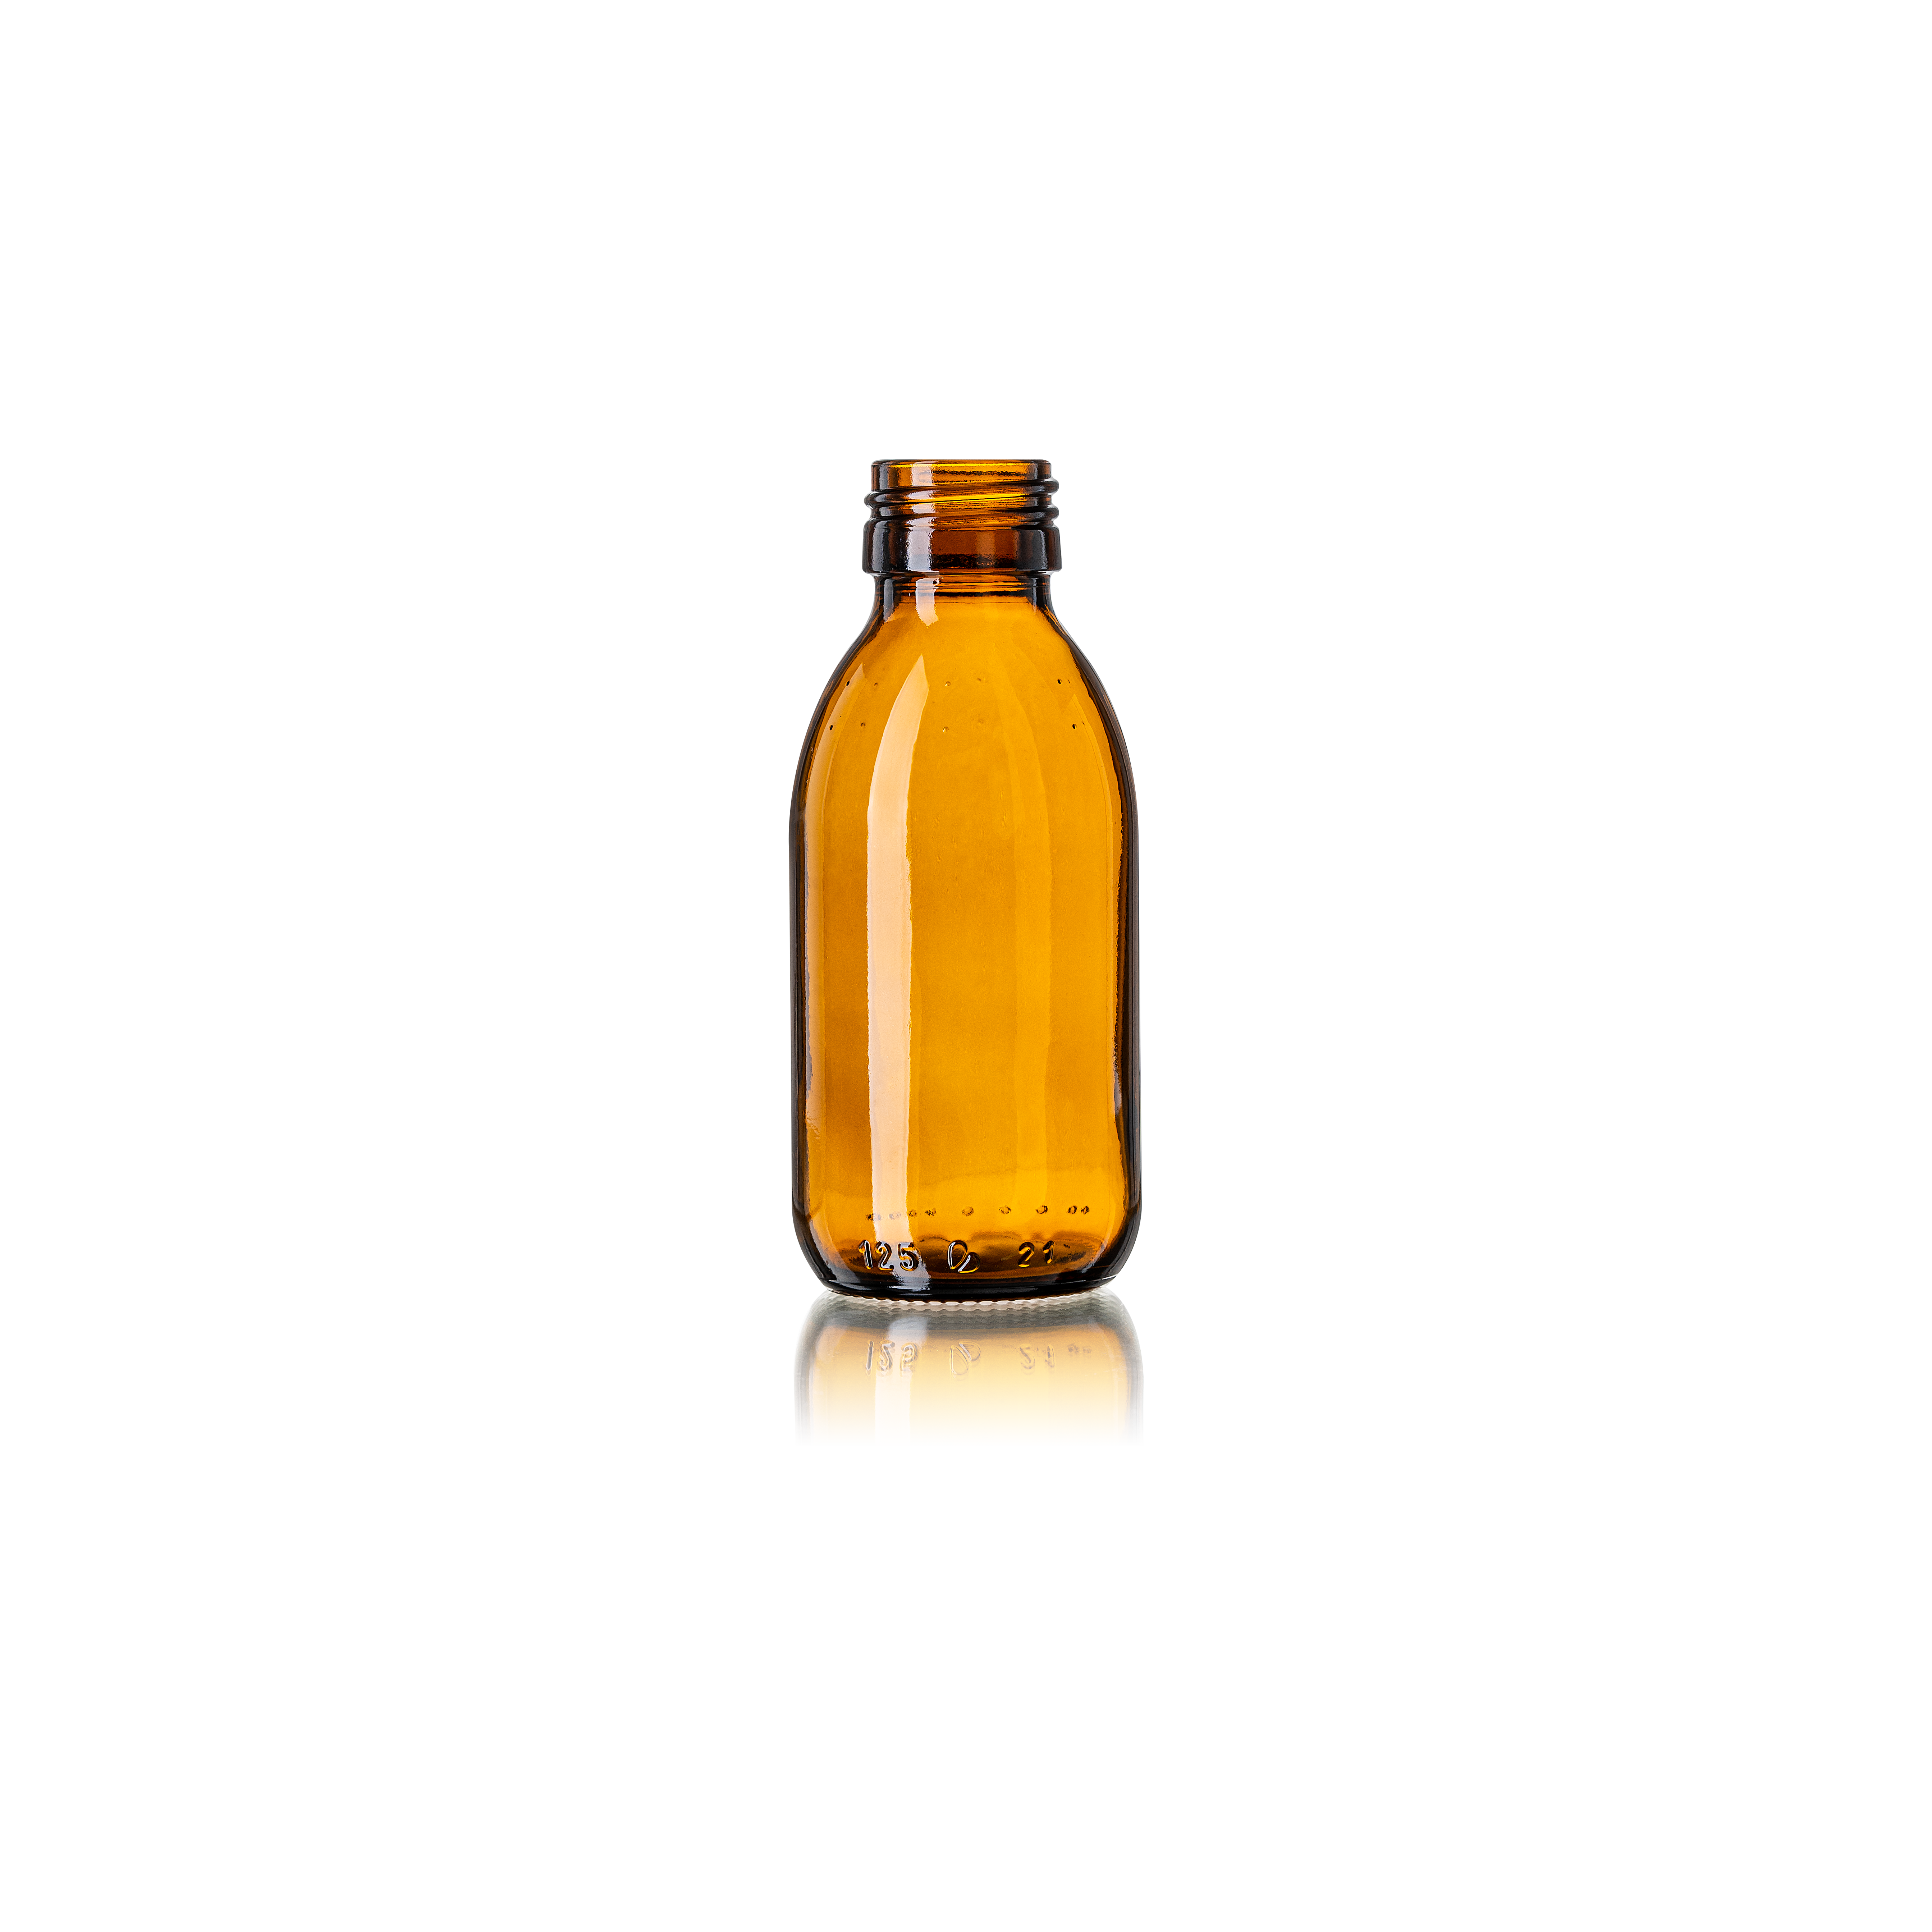 Syrup bottle Thyme 125ml, PP28, Amber